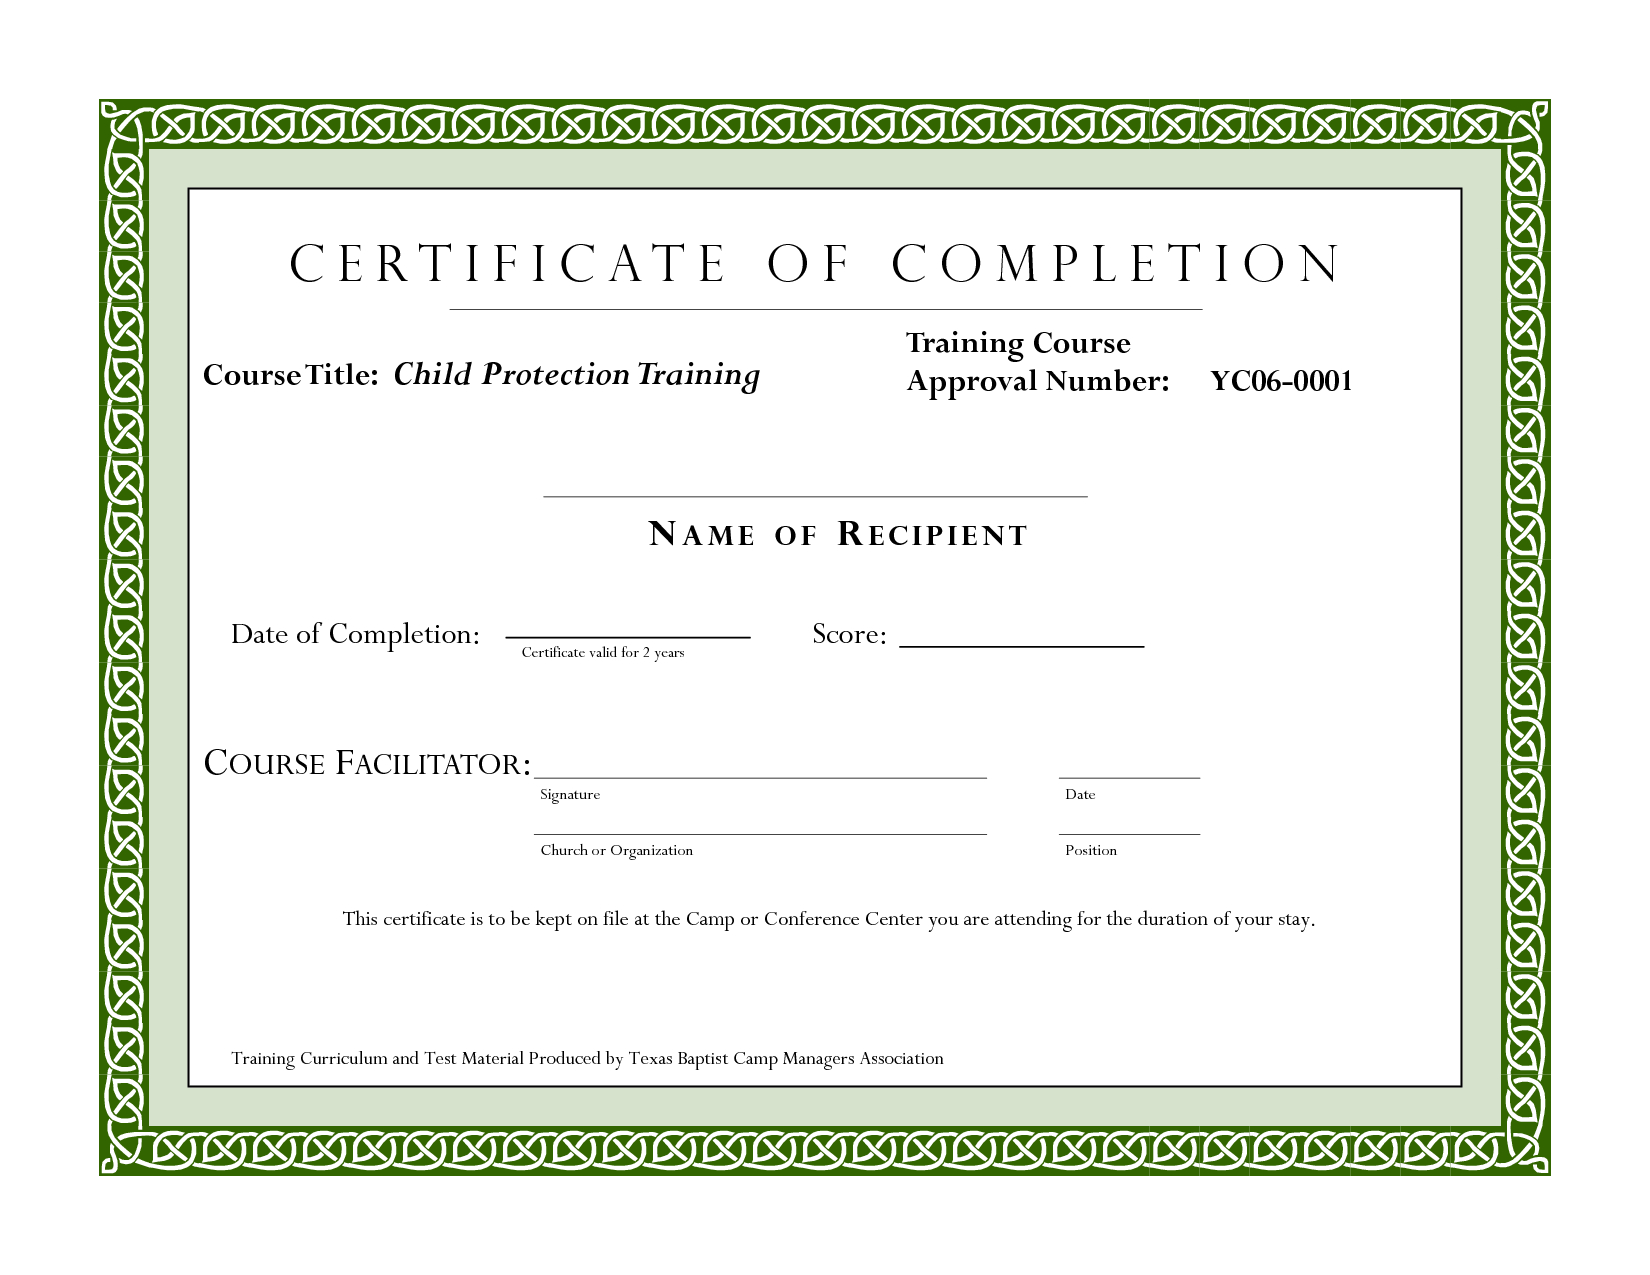 Course Completion Certificate Template | Certificate Of With Regard To Army Certificate Of Completion Template